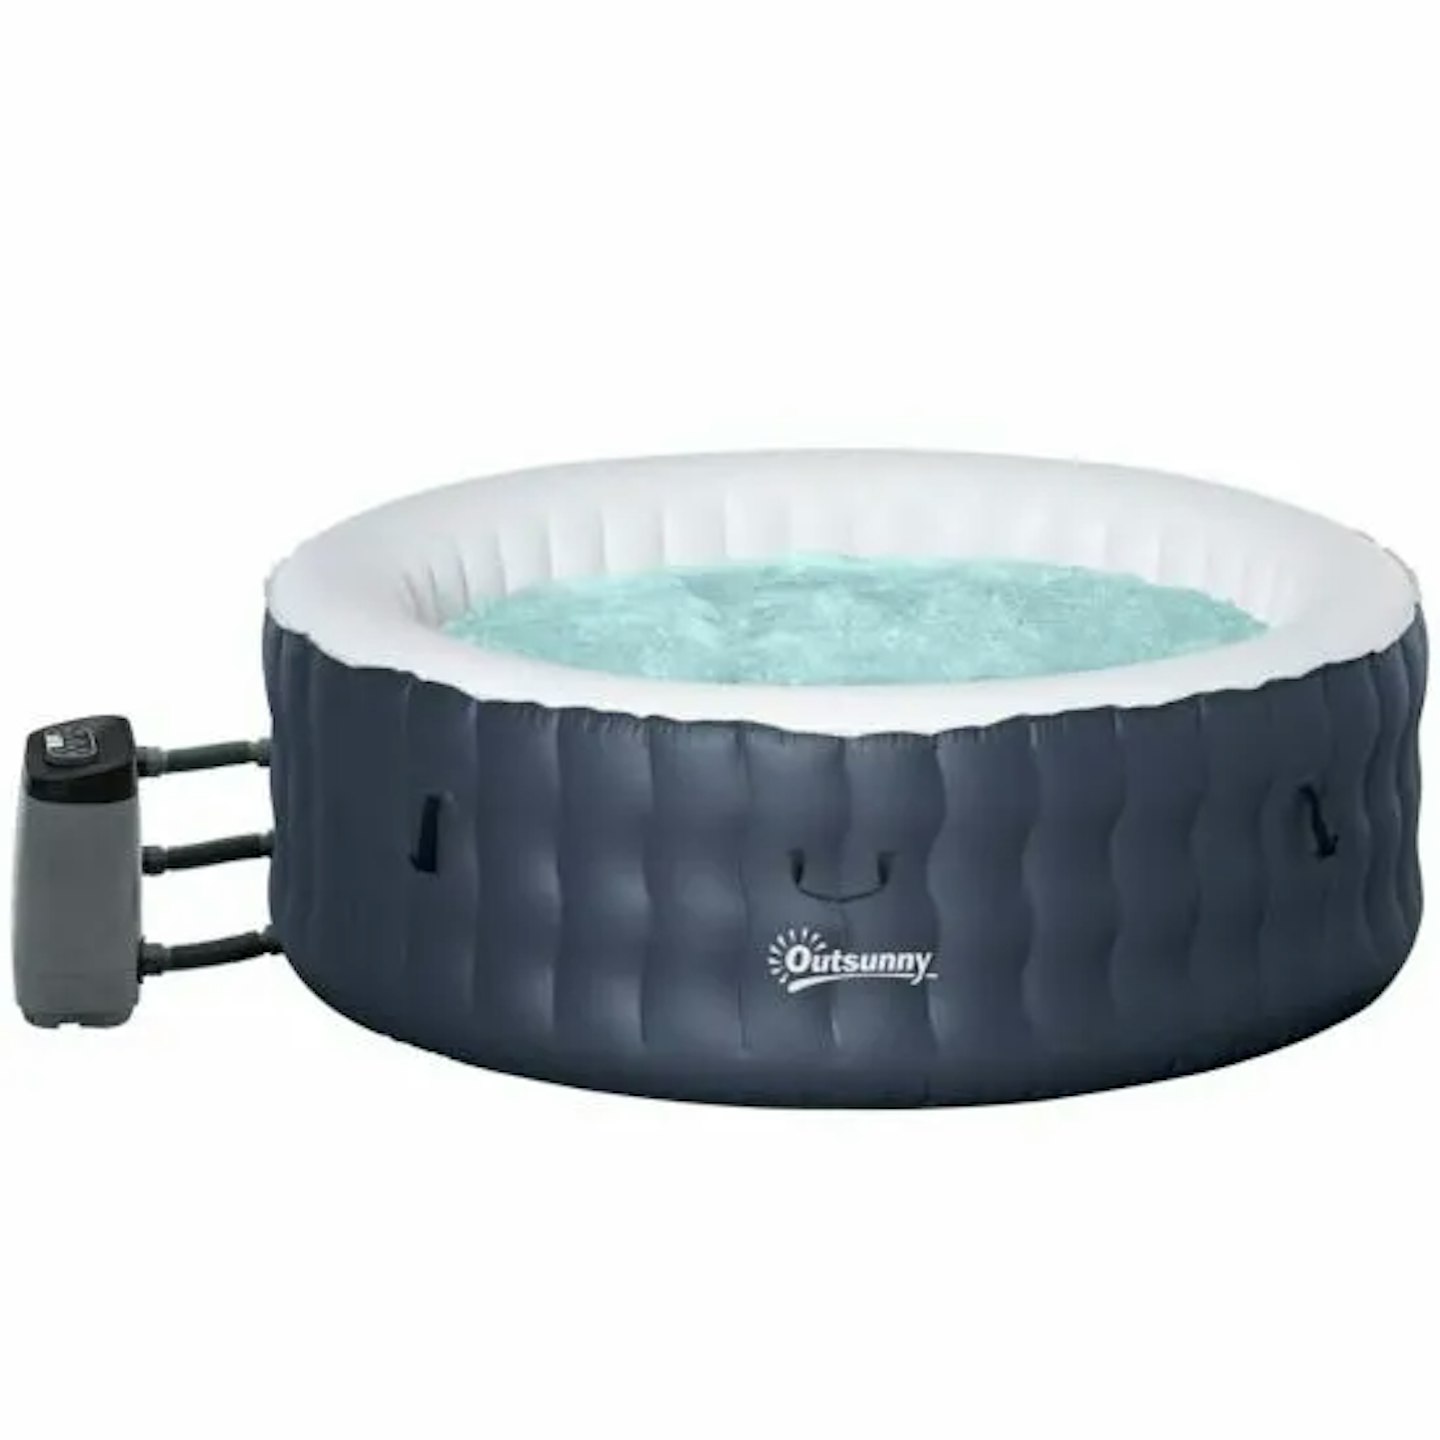 Outsunny Inflatable Hot Tub Spa With Pump 4 Person - Dark Blue